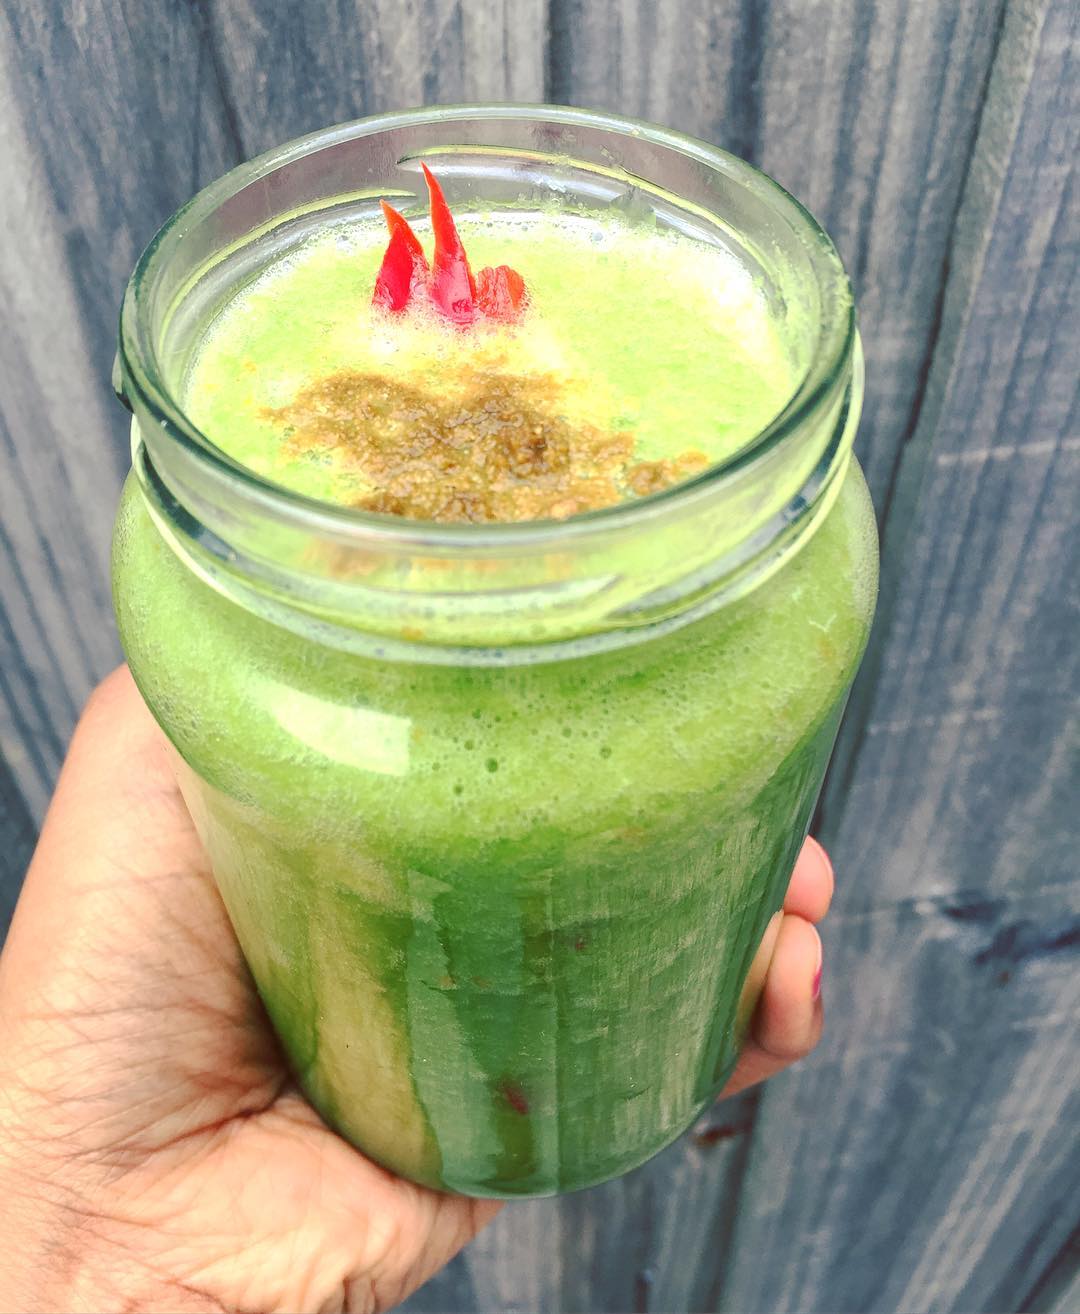 My Favourite Green Smoothie for Sometime